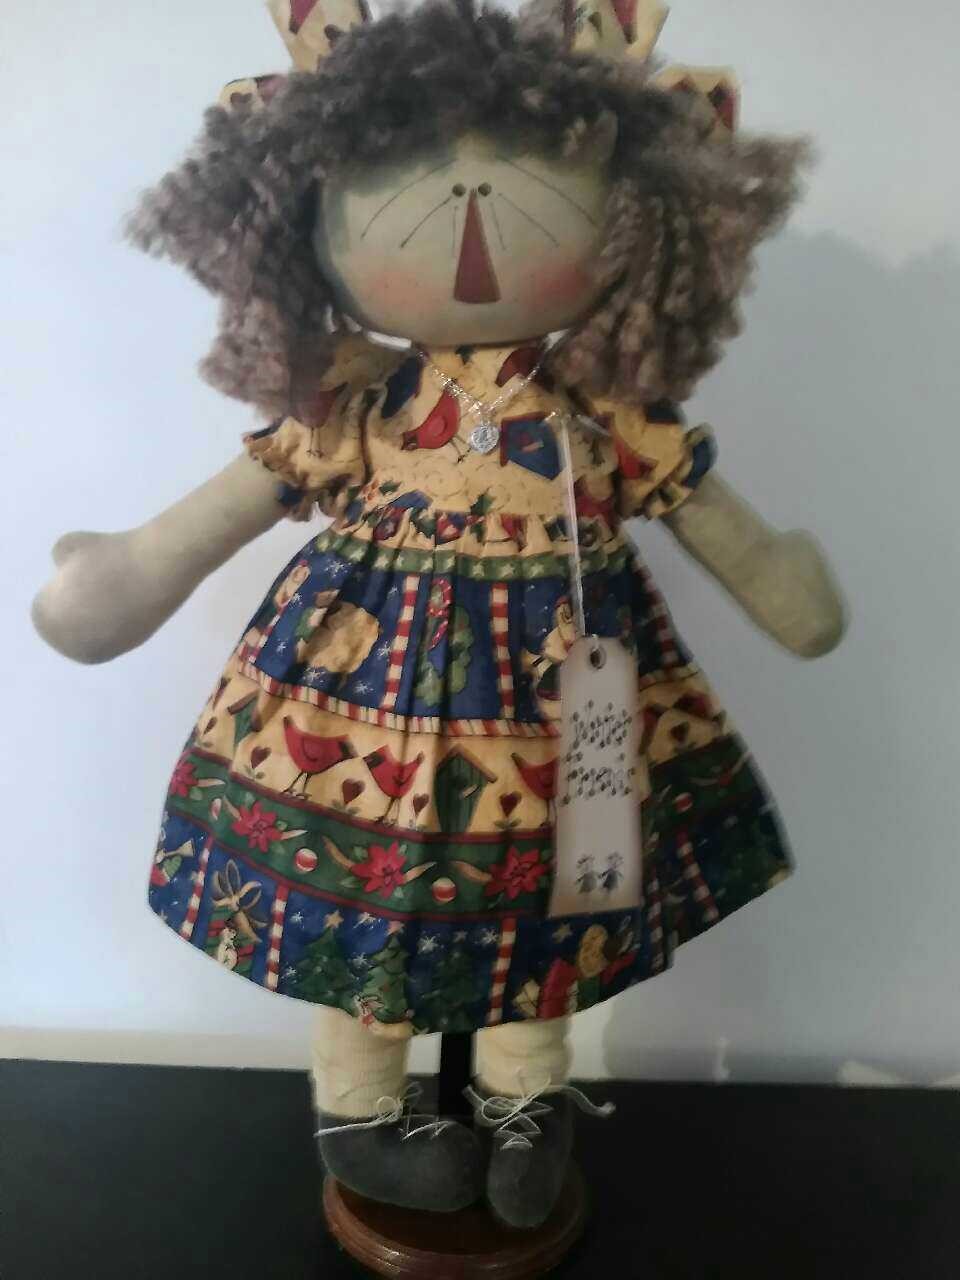 Winter Friends-handmade, hand crafted, primitive, country, rag doll, rag, doll, wholesale, retail, gift, present, friend gift, birthday gift, original, design, original design, winter, holiday, feed birds